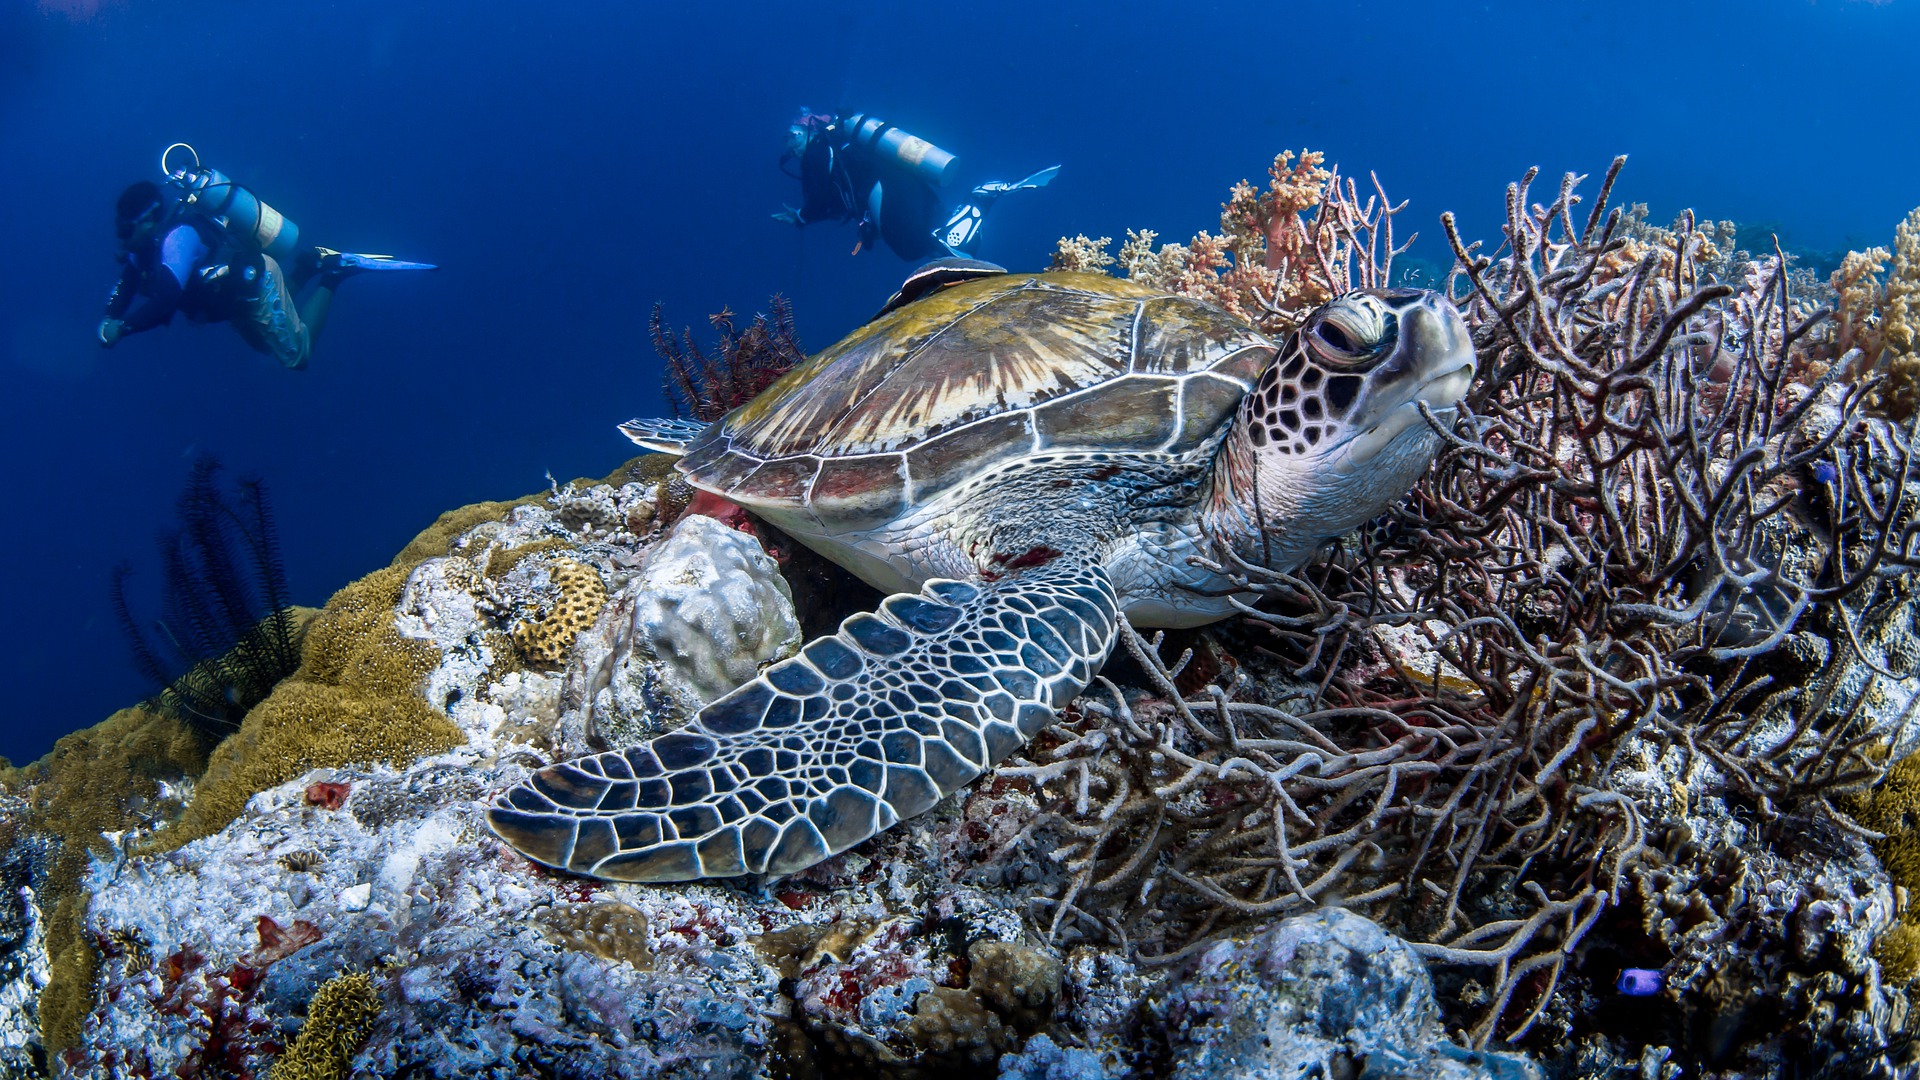 A sea turtle on a reef with divers